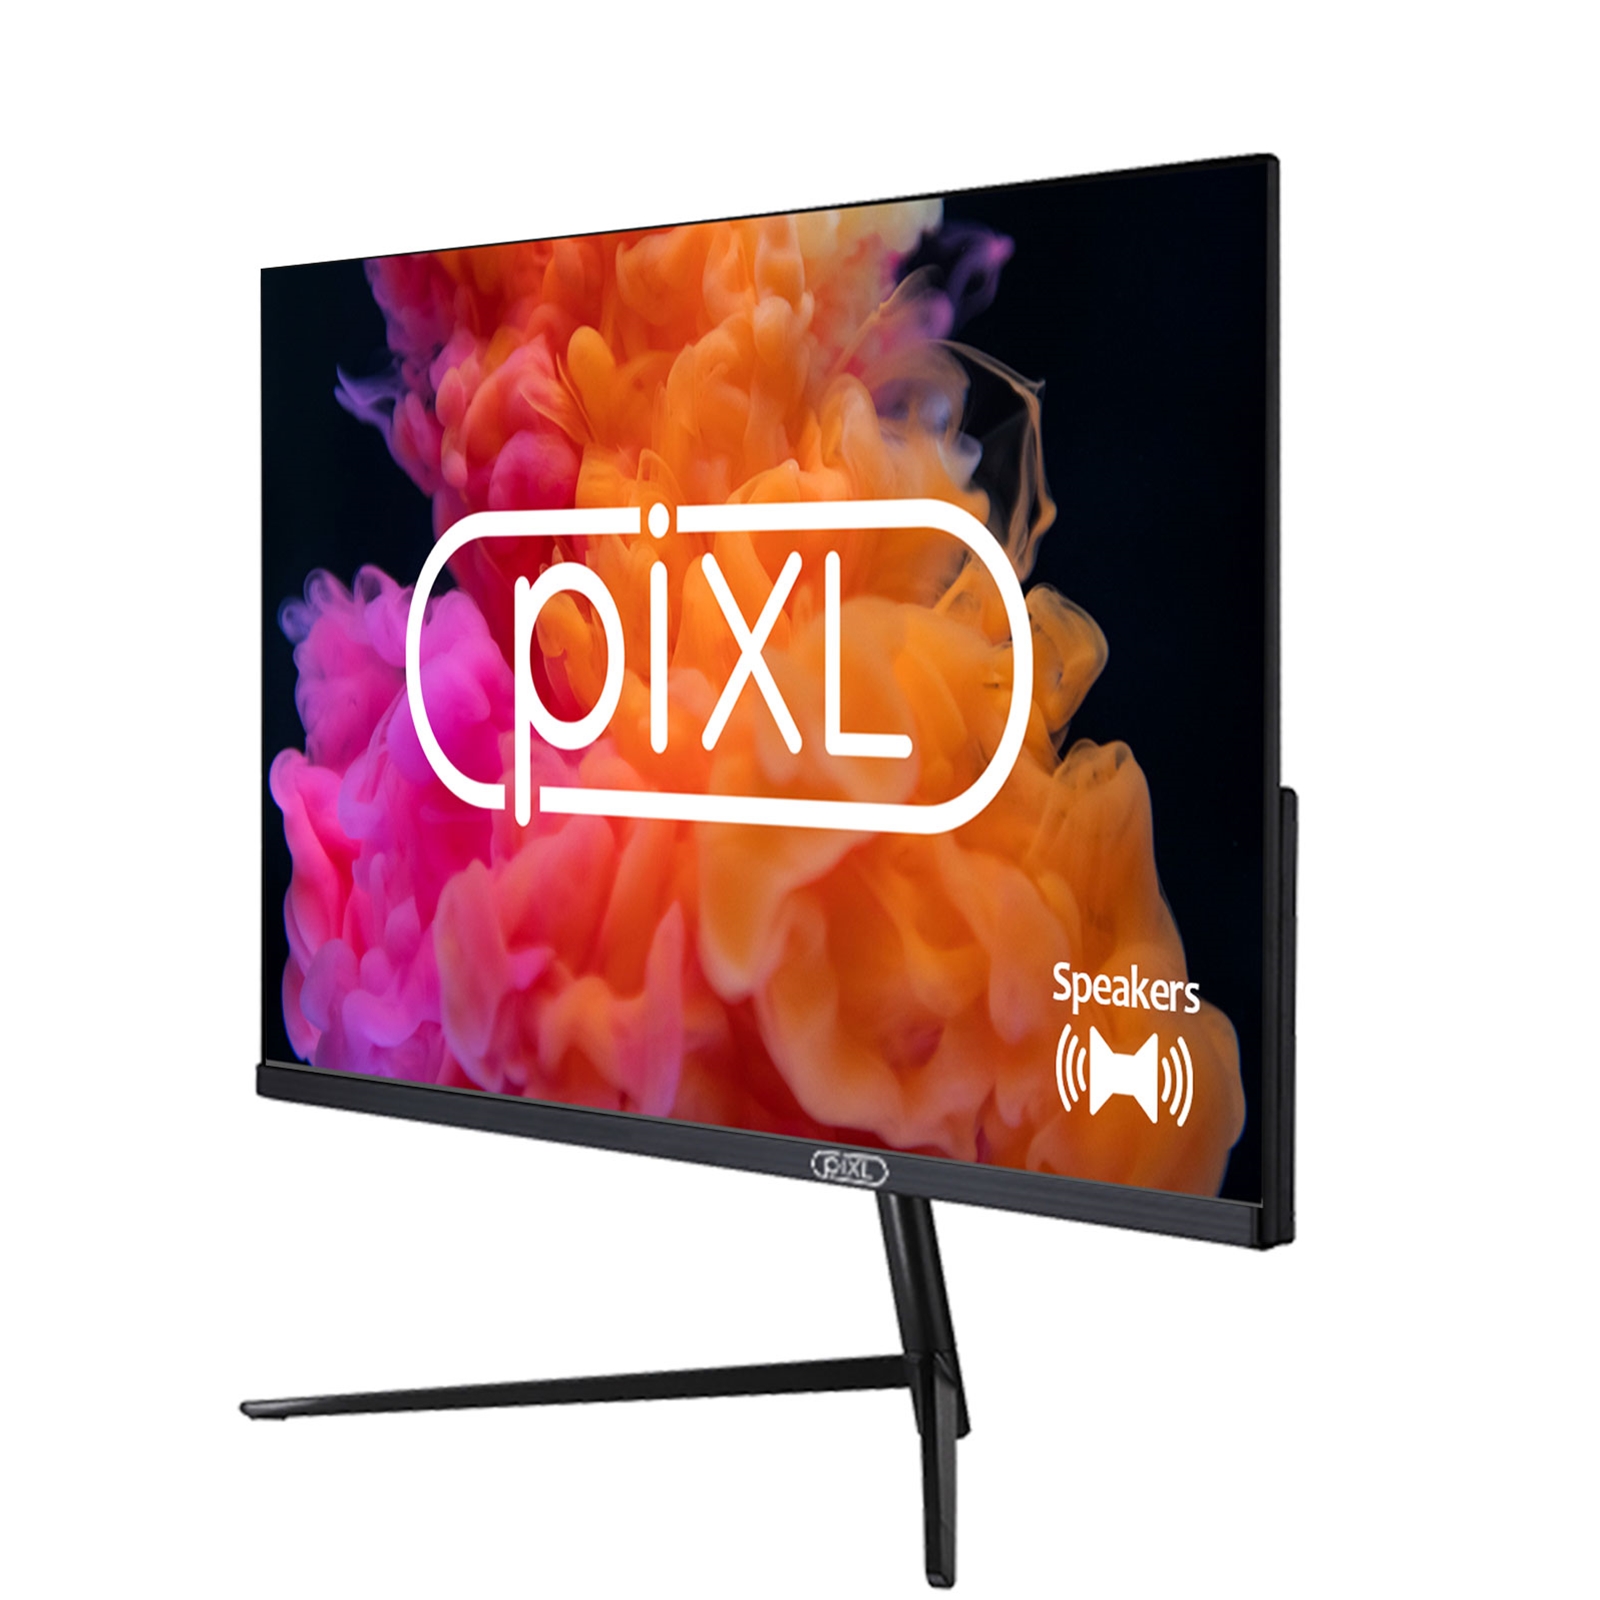 piXL PXD24VH 24 Inch Frameless Monitor, Widescreen, 6.5ms Response Time, 60Hz Refresh Rate, Full HD 1920 x 1080, 16:10 Aspect Ratio, VGA, HDMI, Internal PSU, Speakers, 16.7 Million Colour Support, Black Finish